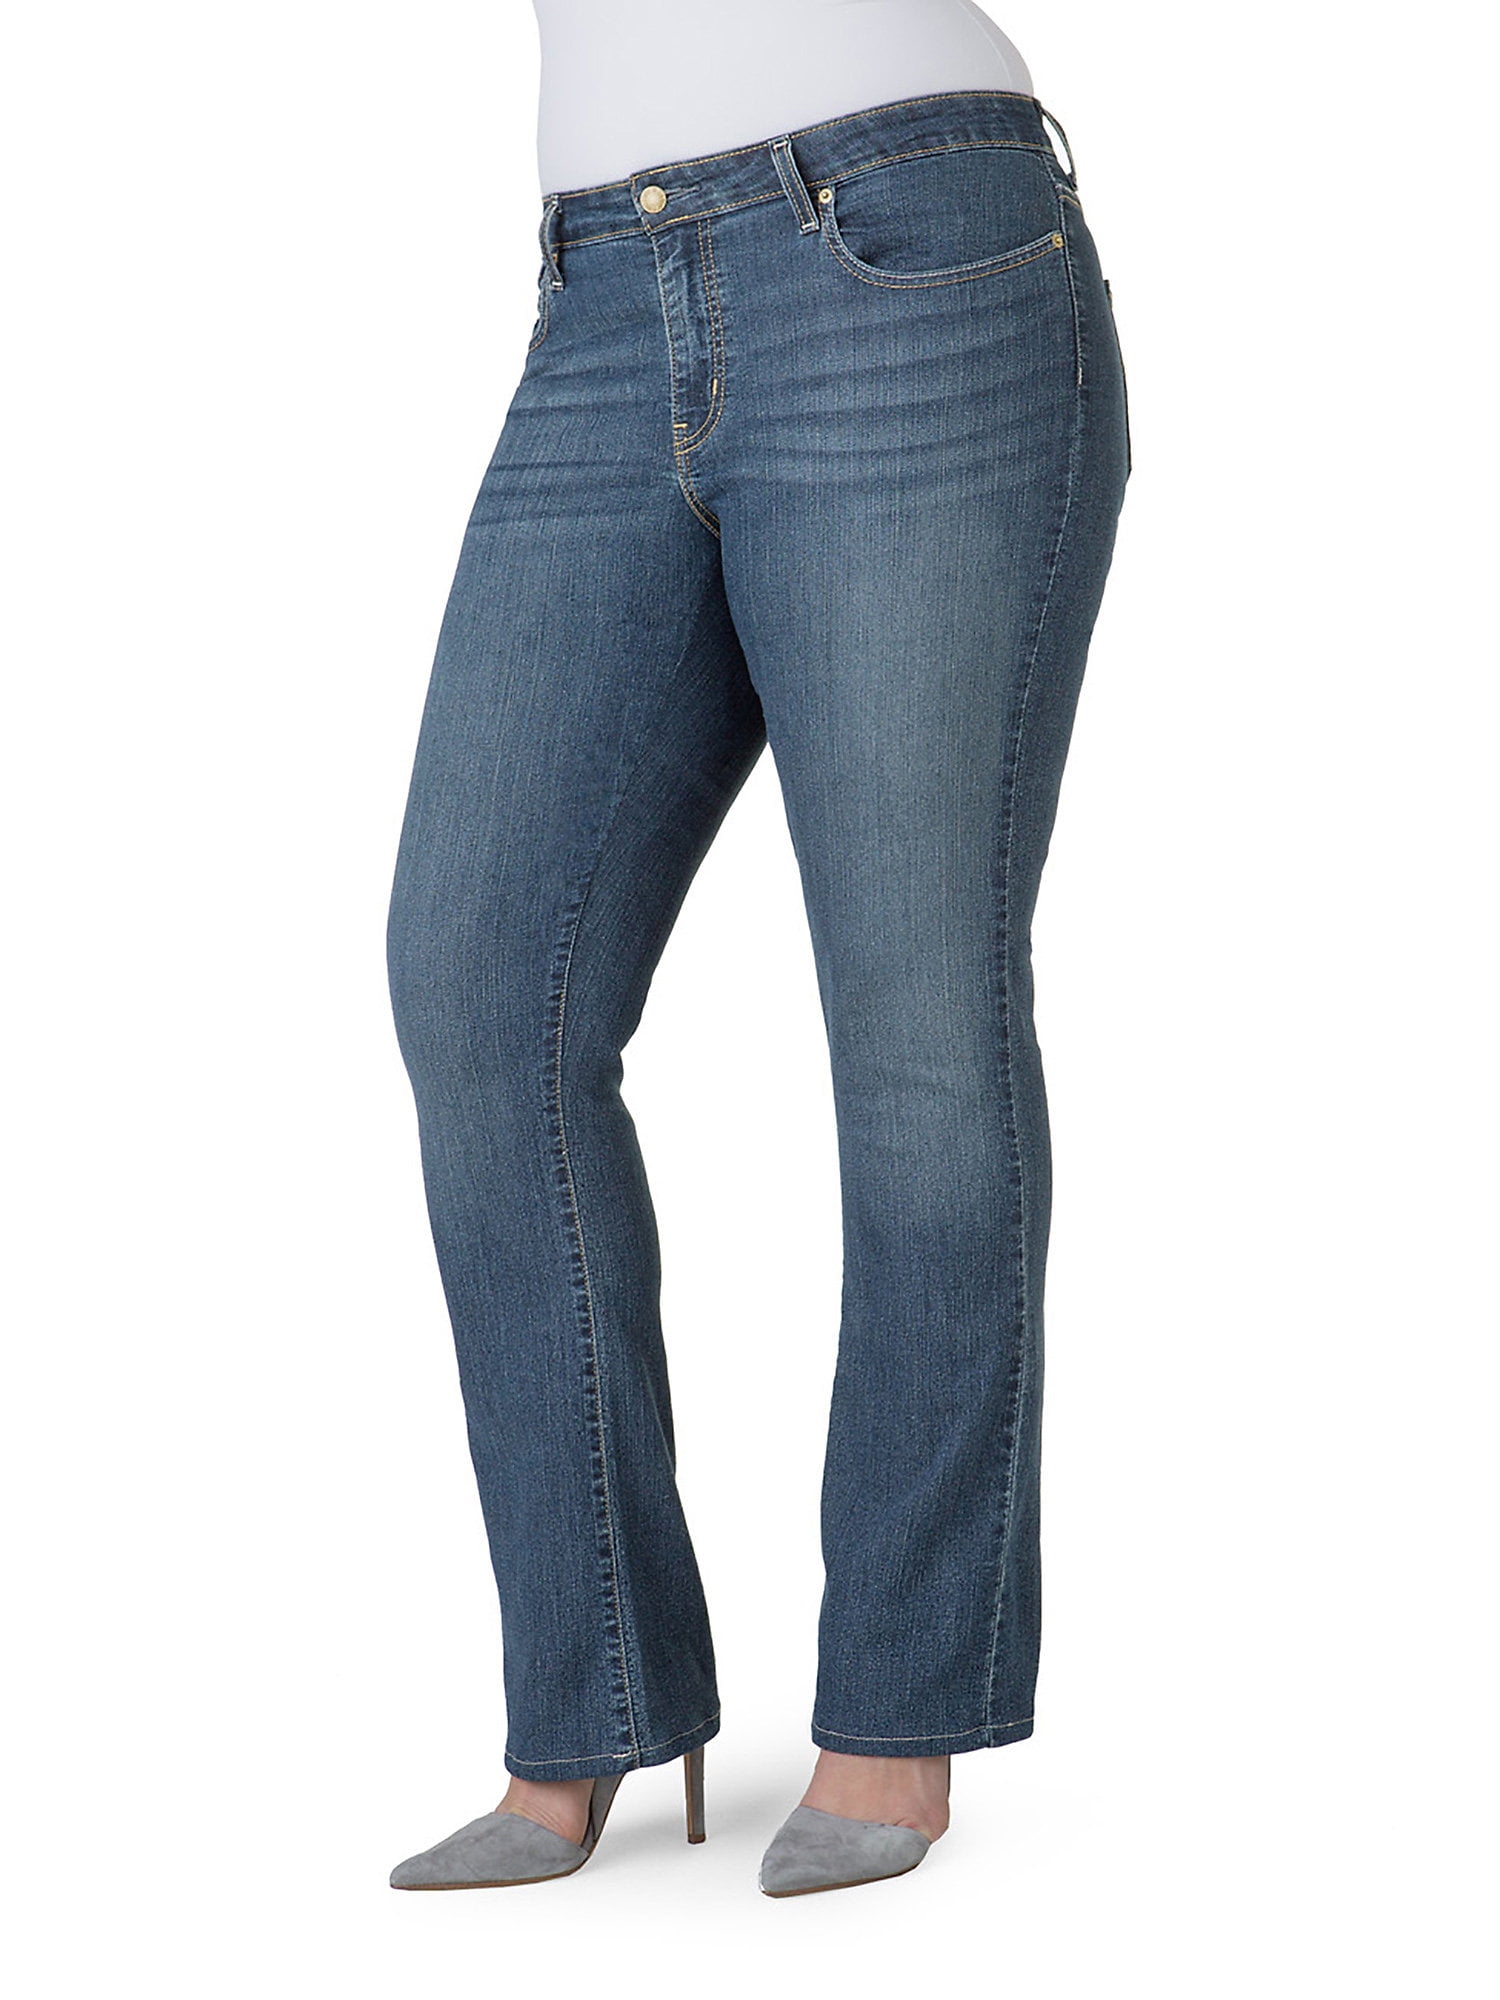 Signature by Levi Strauss & Co. - Signature by Levi Strauss & Co. Women ...